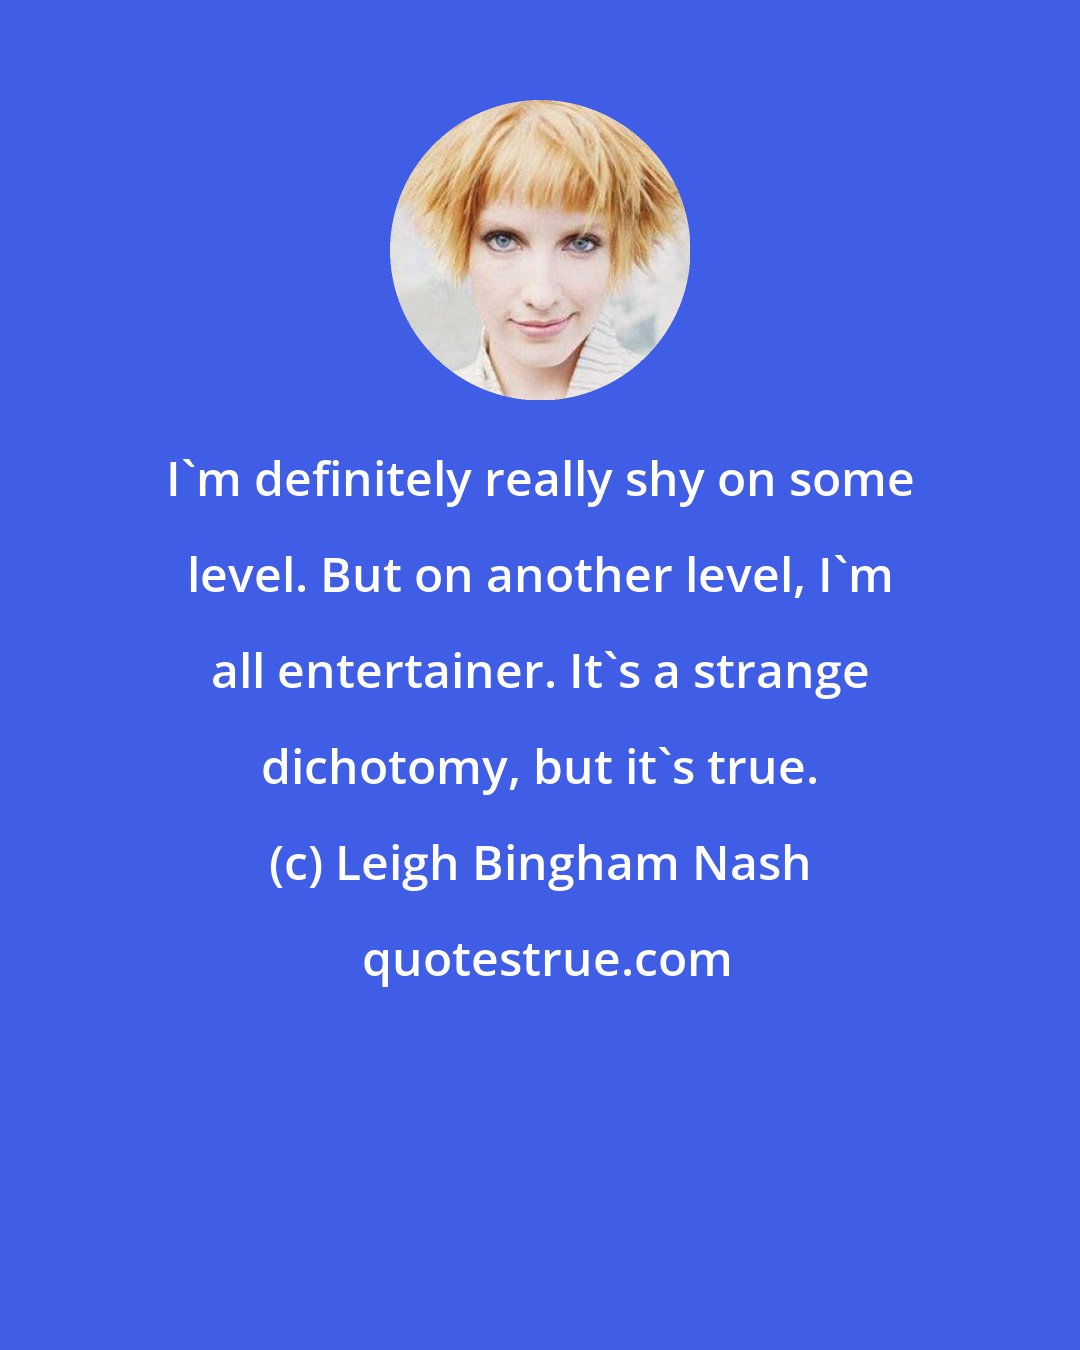 Leigh Bingham Nash: I'm definitely really shy on some level. But on another level, I'm all entertainer. It's a strange dichotomy, but it's true.